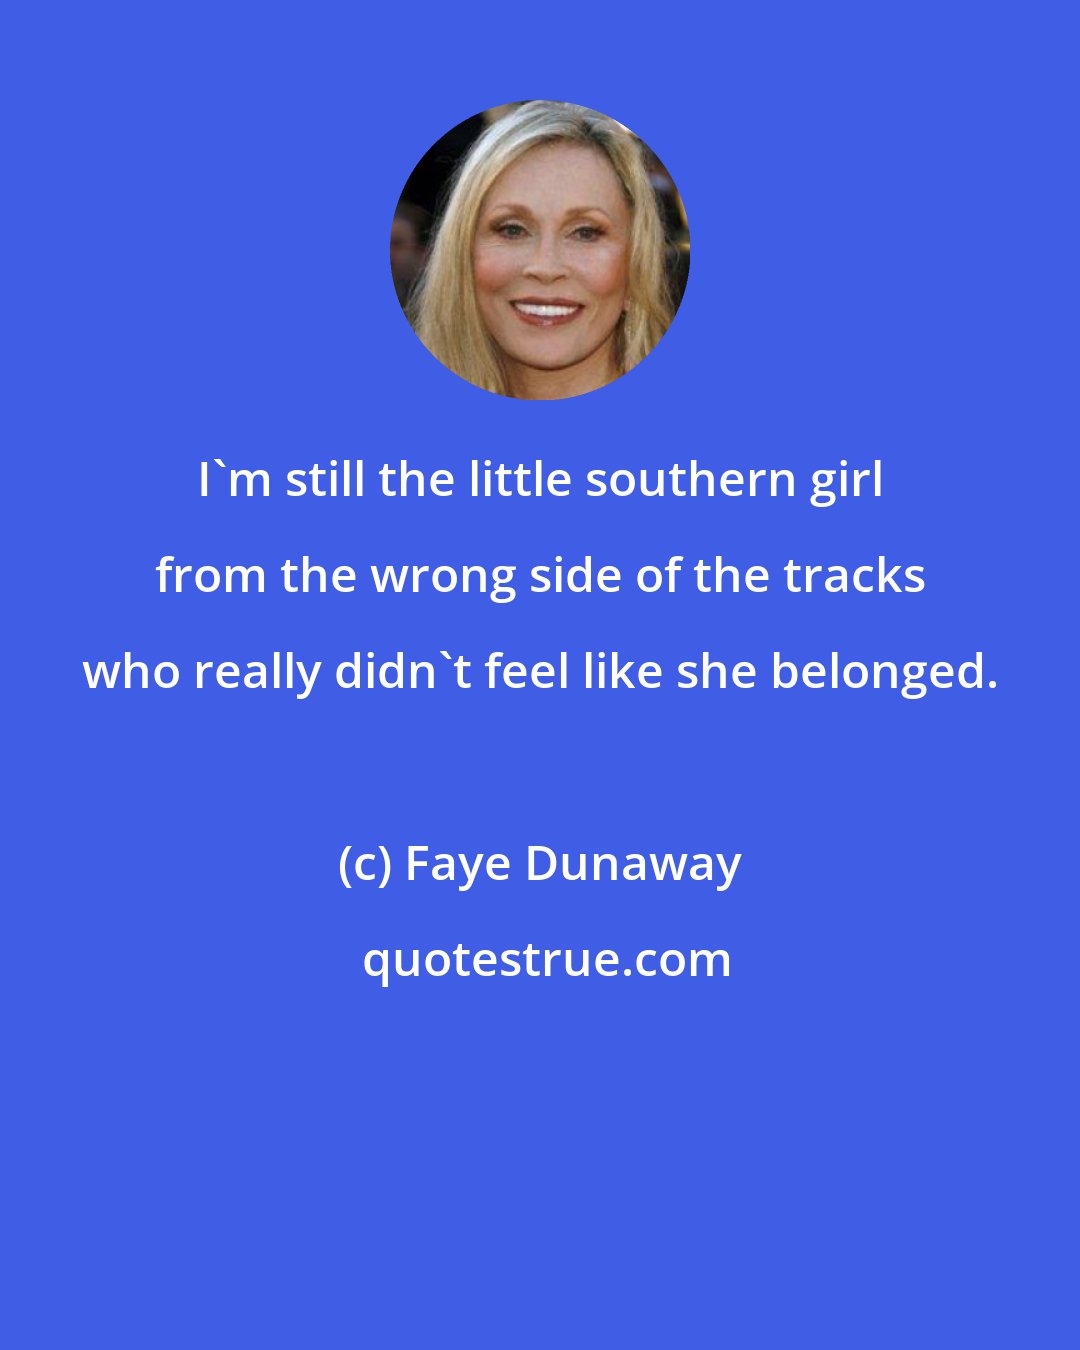 Faye Dunaway: I'm still the little southern girl from the wrong side of the tracks who really didn't feel like she belonged.